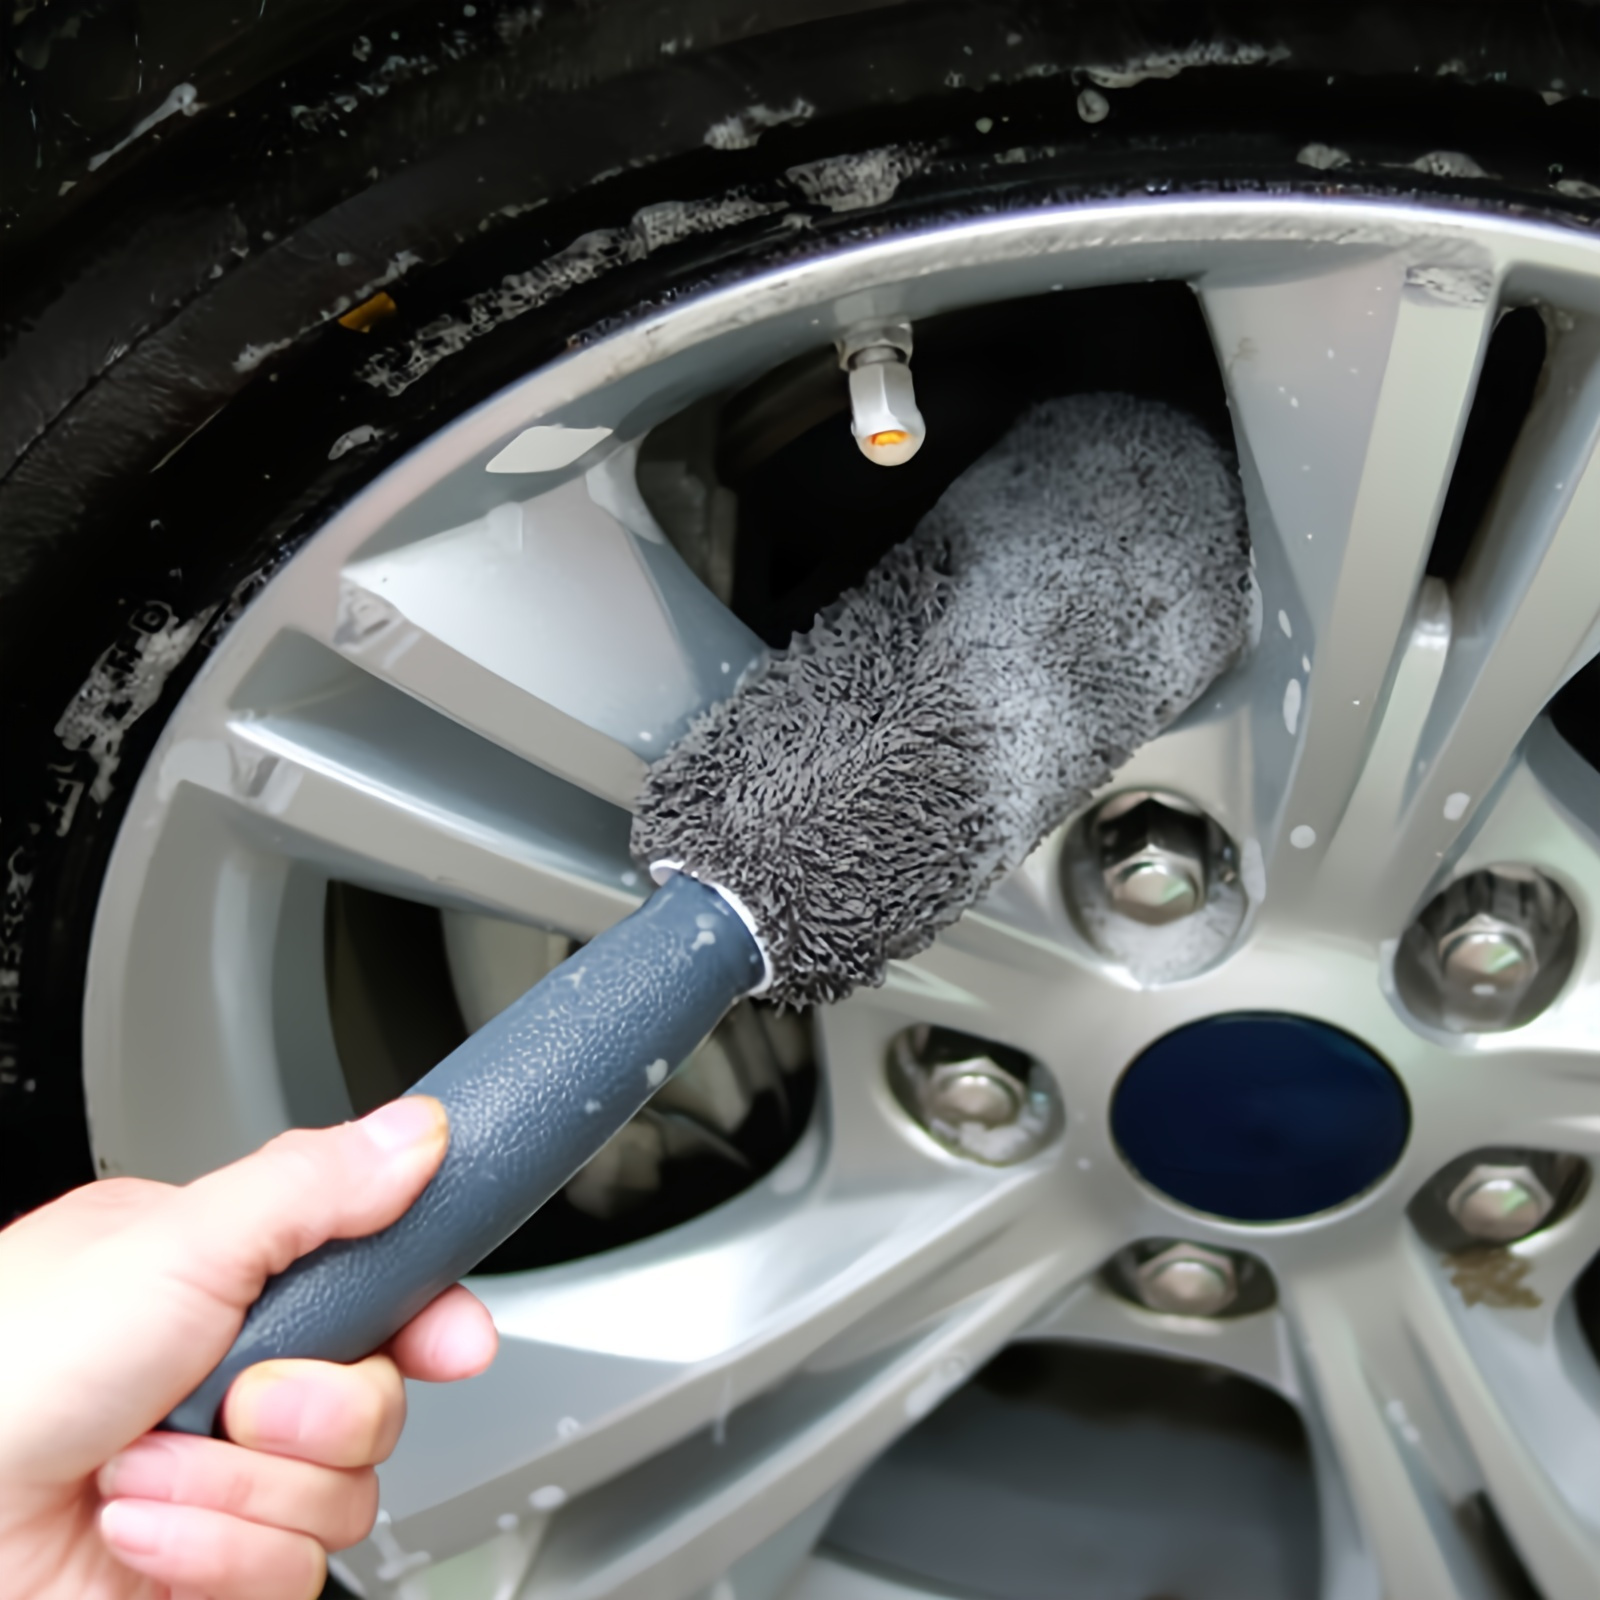 Rim Cleaner Hgkj 14 Auto Wheel Cleaning Concentrate Iron Power Remover  Tires Disks Brush Chemistry Motorcycle Car Care